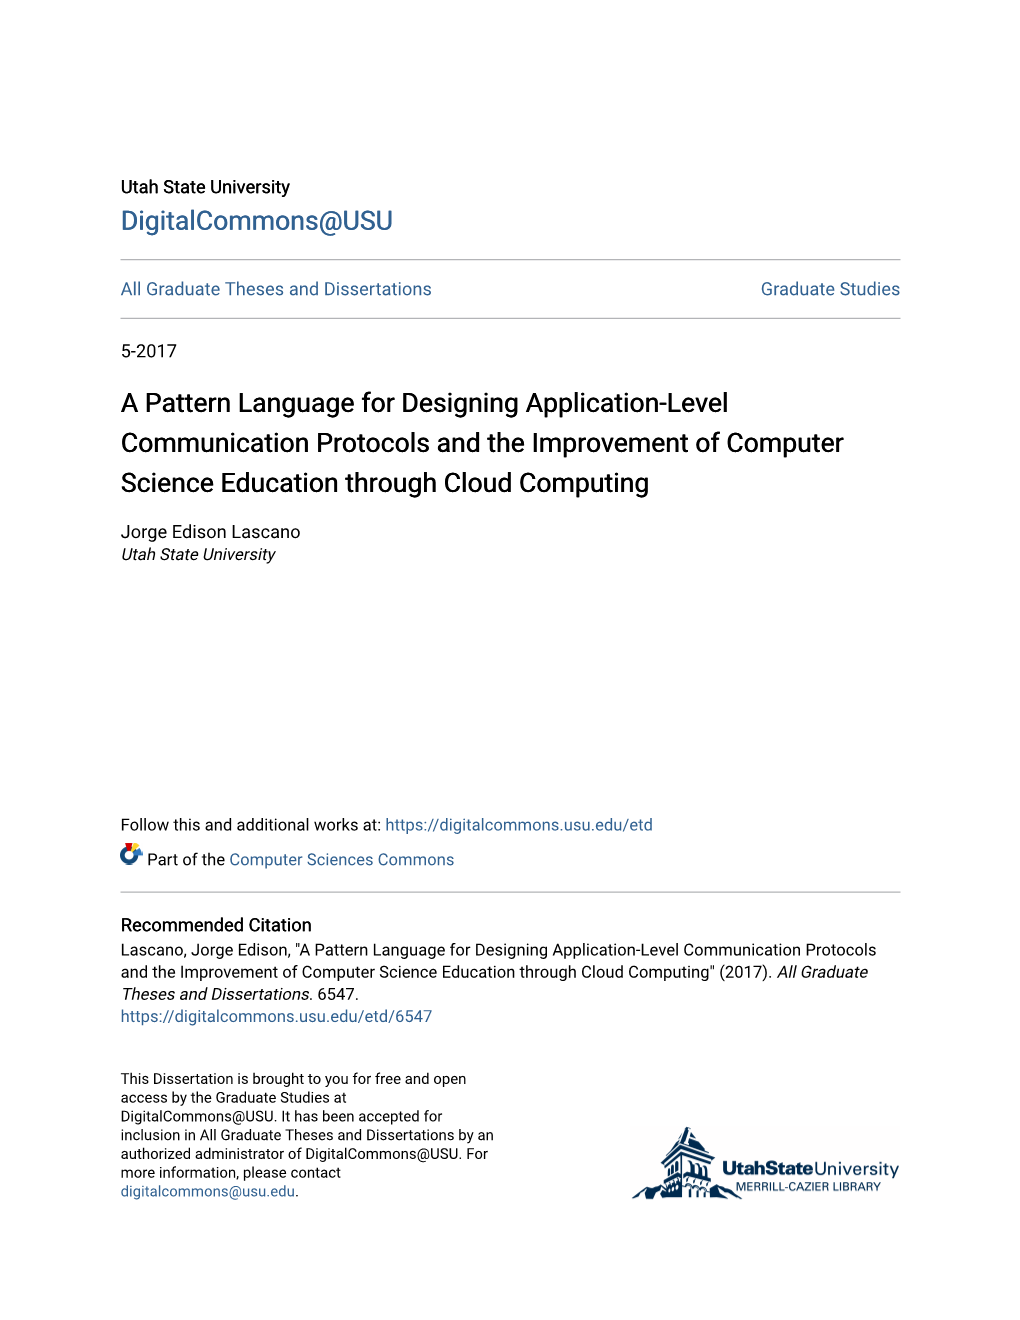 A Pattern Language for Designing Application-Level Communication Protocols and the Improvement of Computer Science Education Through Cloud Computing